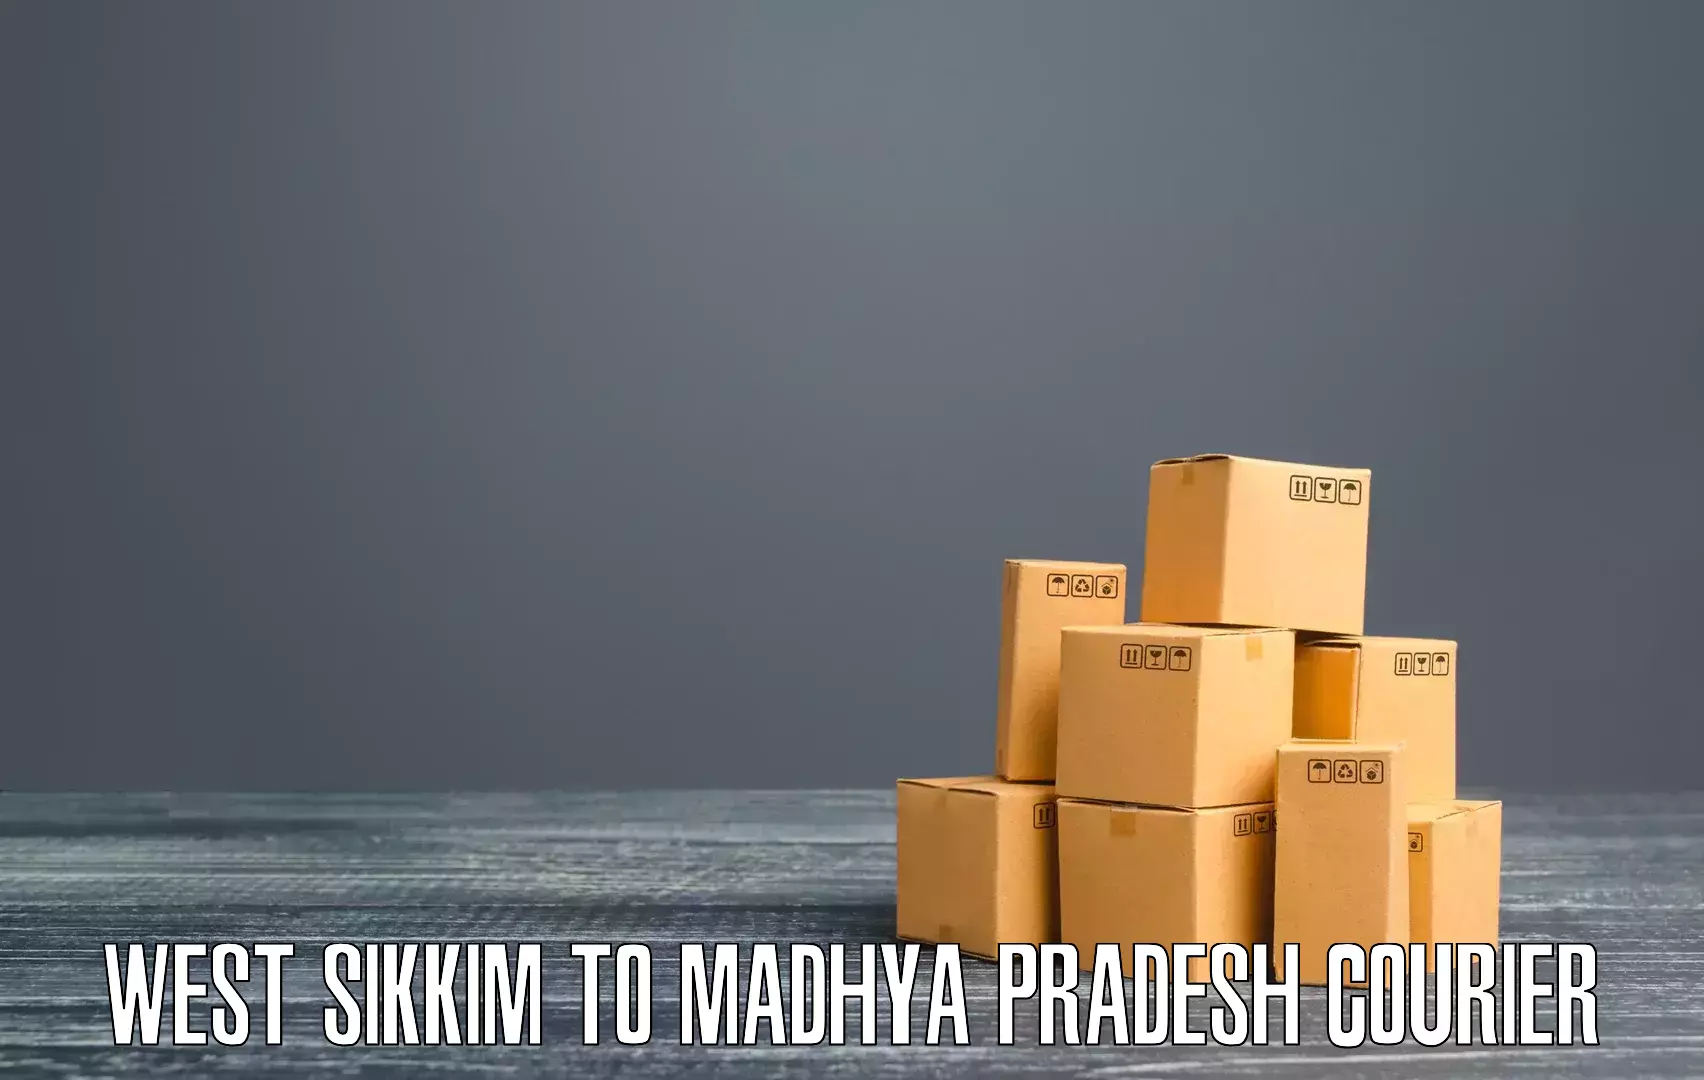 Customer-centric shipping West Sikkim to Alote